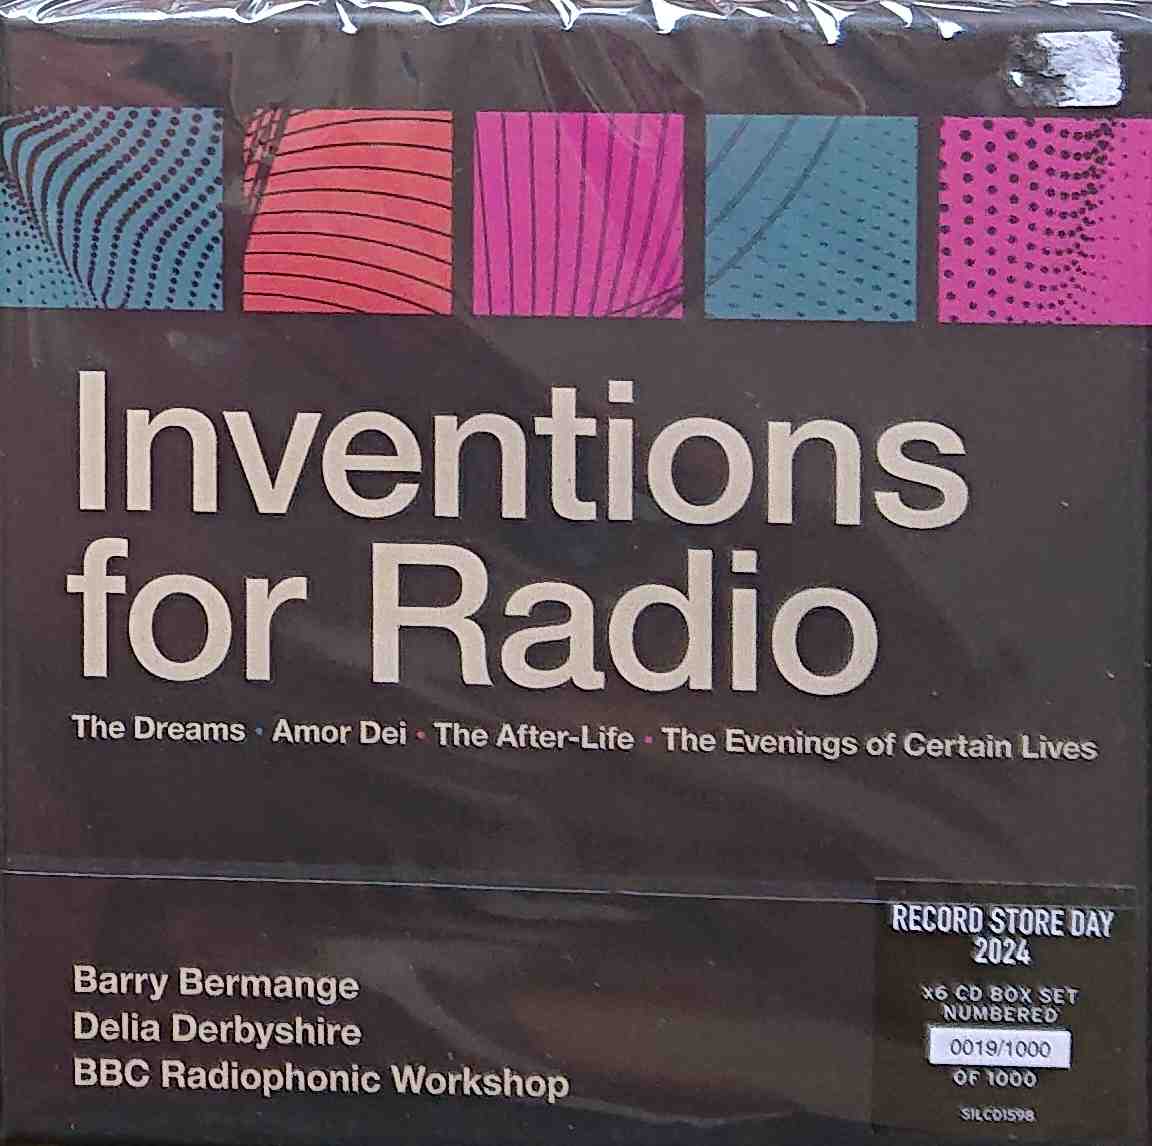 Picture of Inventions for radio by artist Barry Bermange / Delia Derbyshire / BBC Radiophonic Workshop from the BBC cds - Records and Tapes library